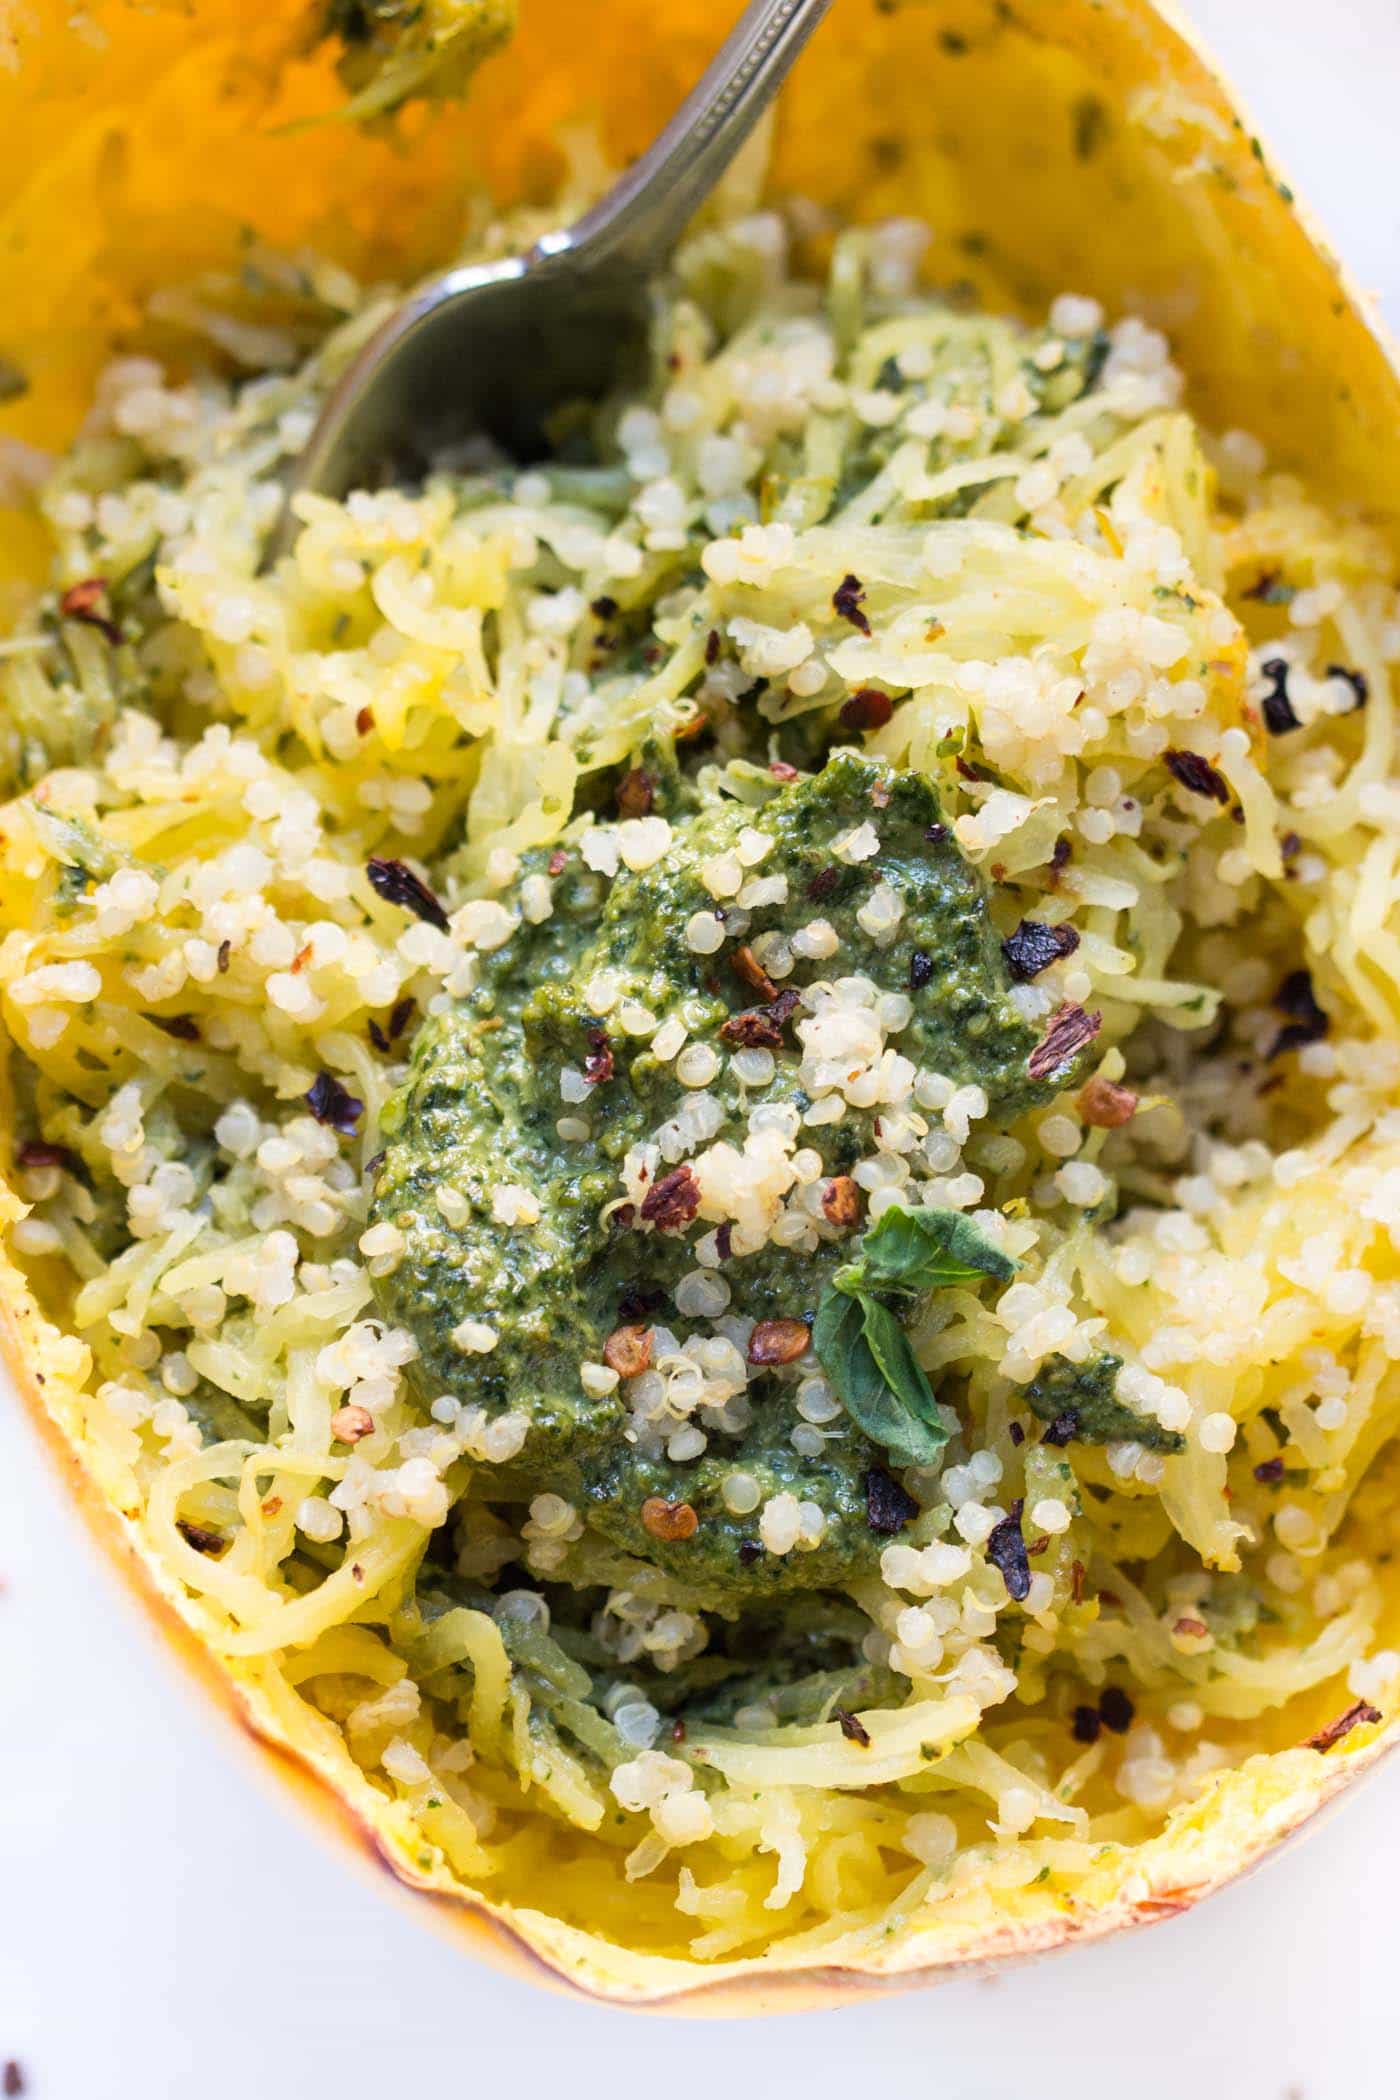 The ULTIMATE spaghetti squash recipe -- topped with homemade pesto, a little quinoa and some chili flakes. Simple, easy and so delicious!